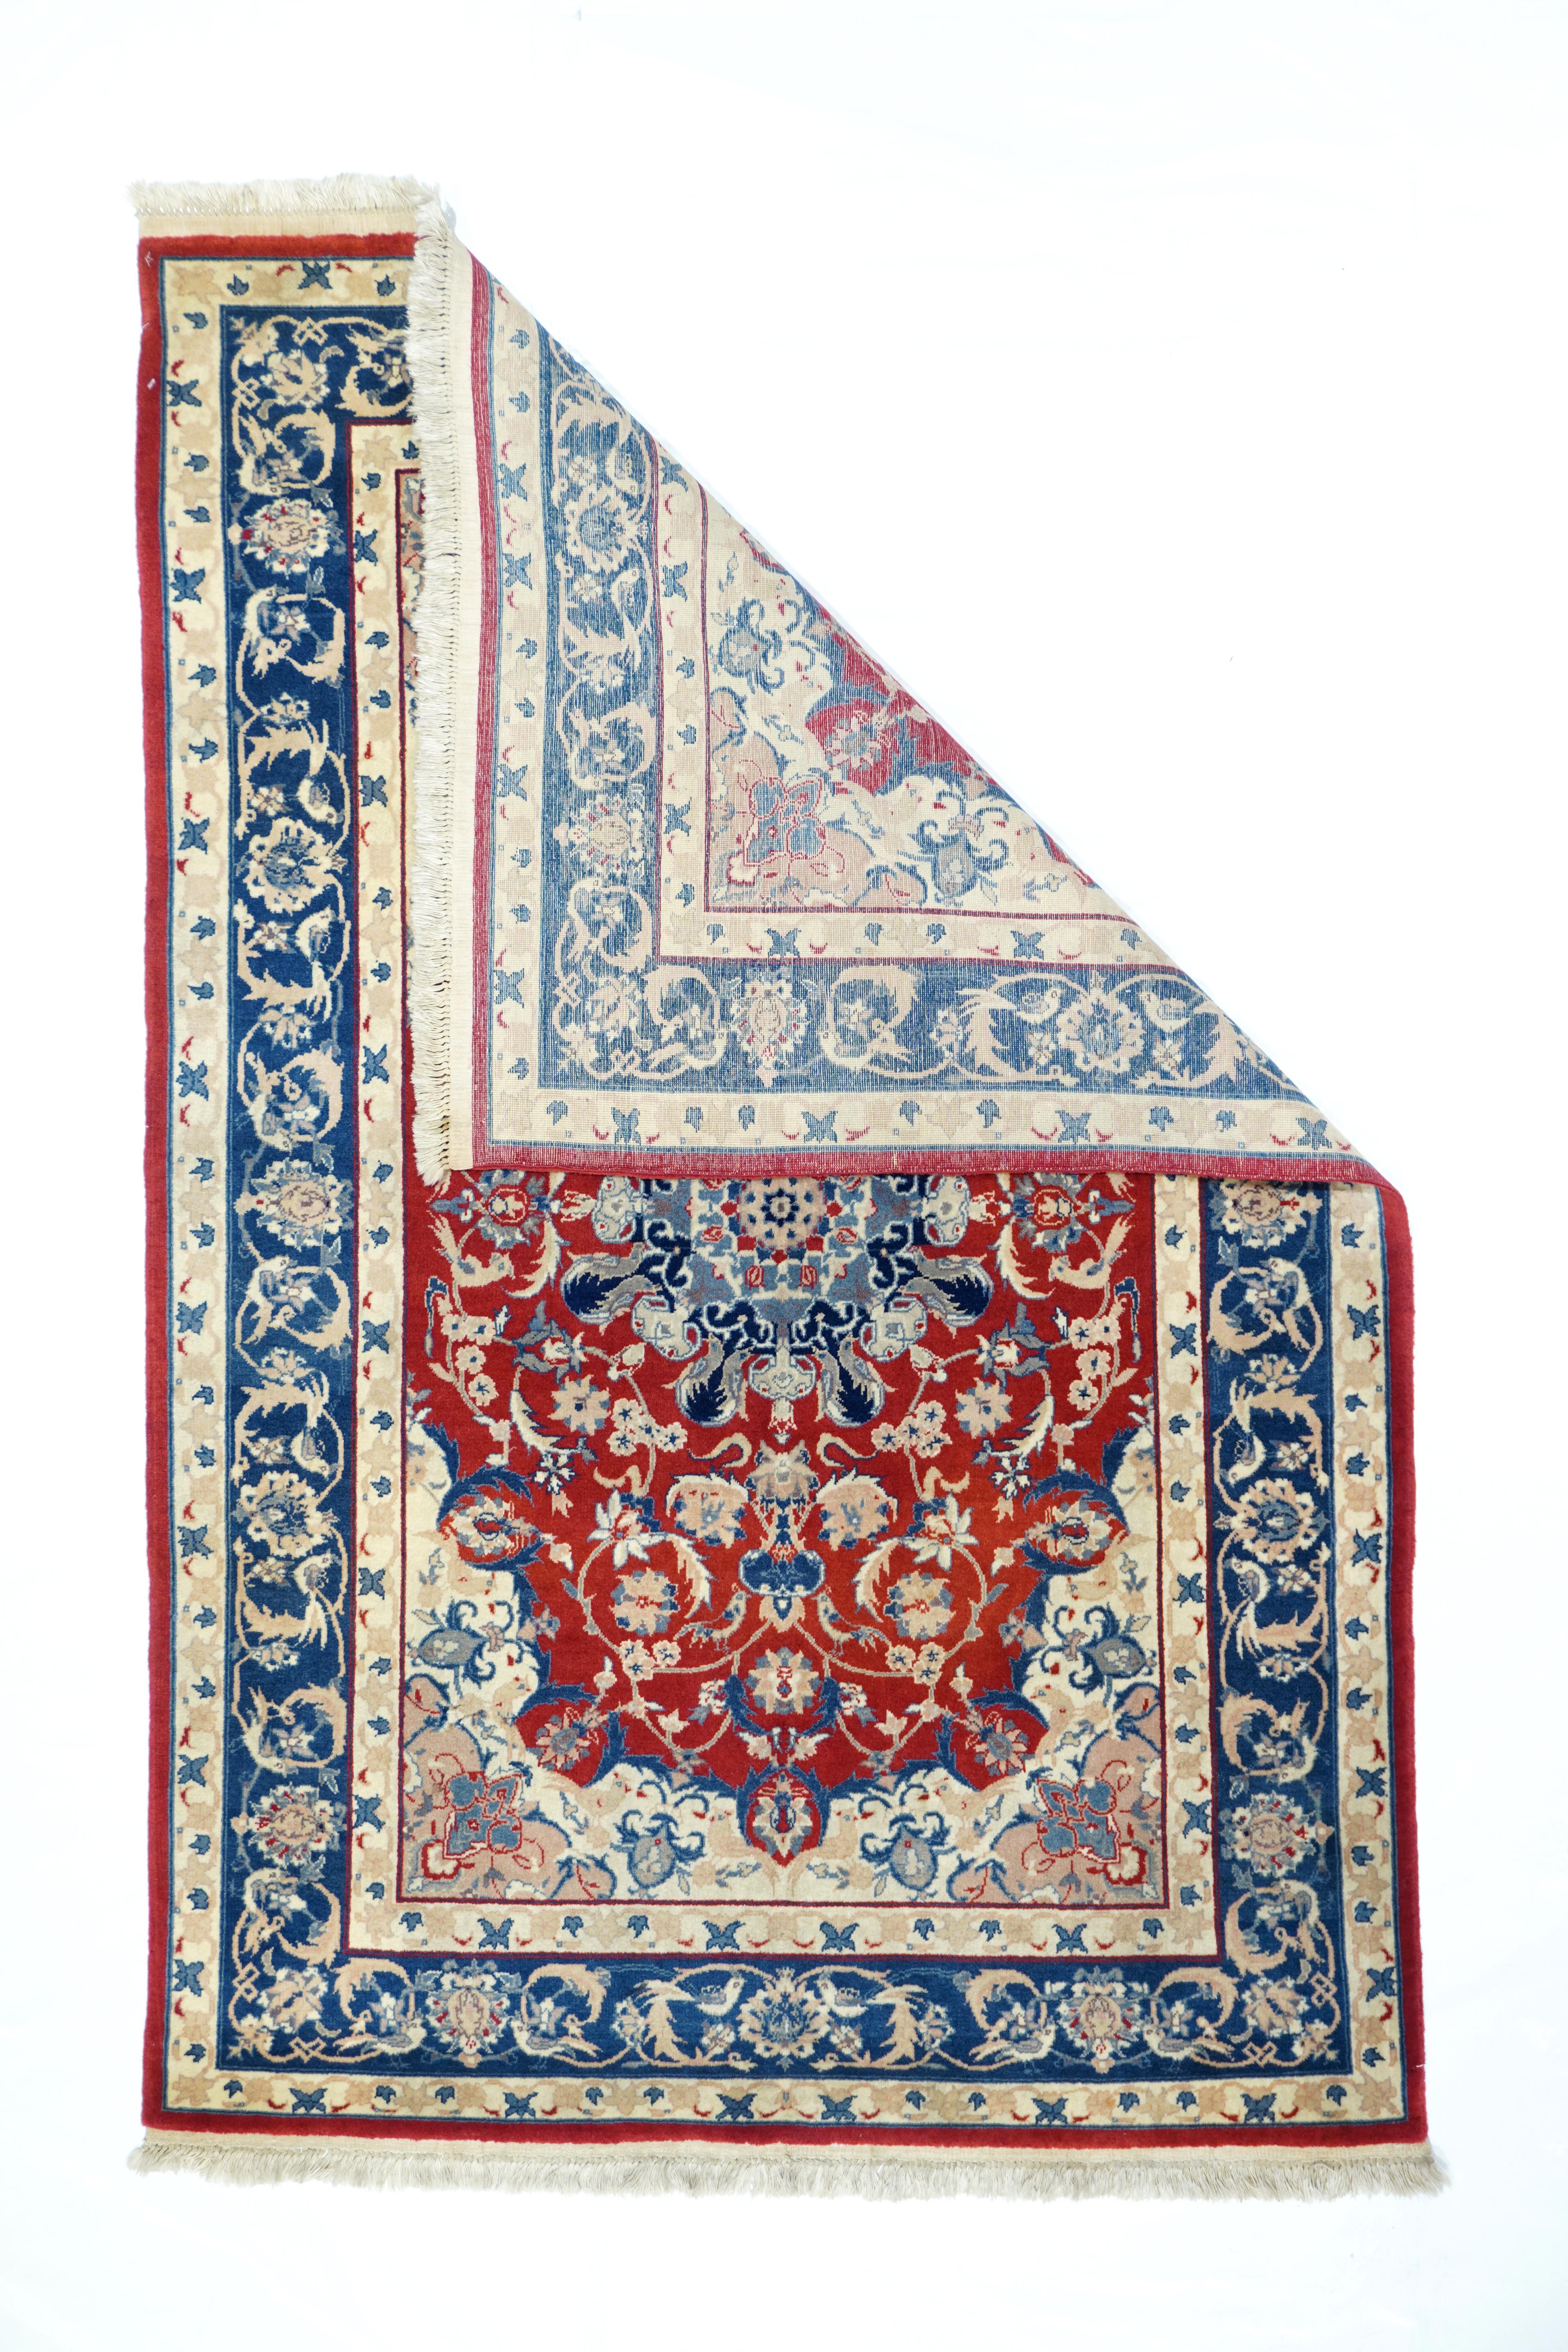 Vintage Persian Isfahan Rug 4' x 6'. The saturated red field features a variety of sickle, lancet and saz leaves, along with rosette groups, palmettes and small birds, all enclosing a teal and navy round medallion with cloud bands, around a cream